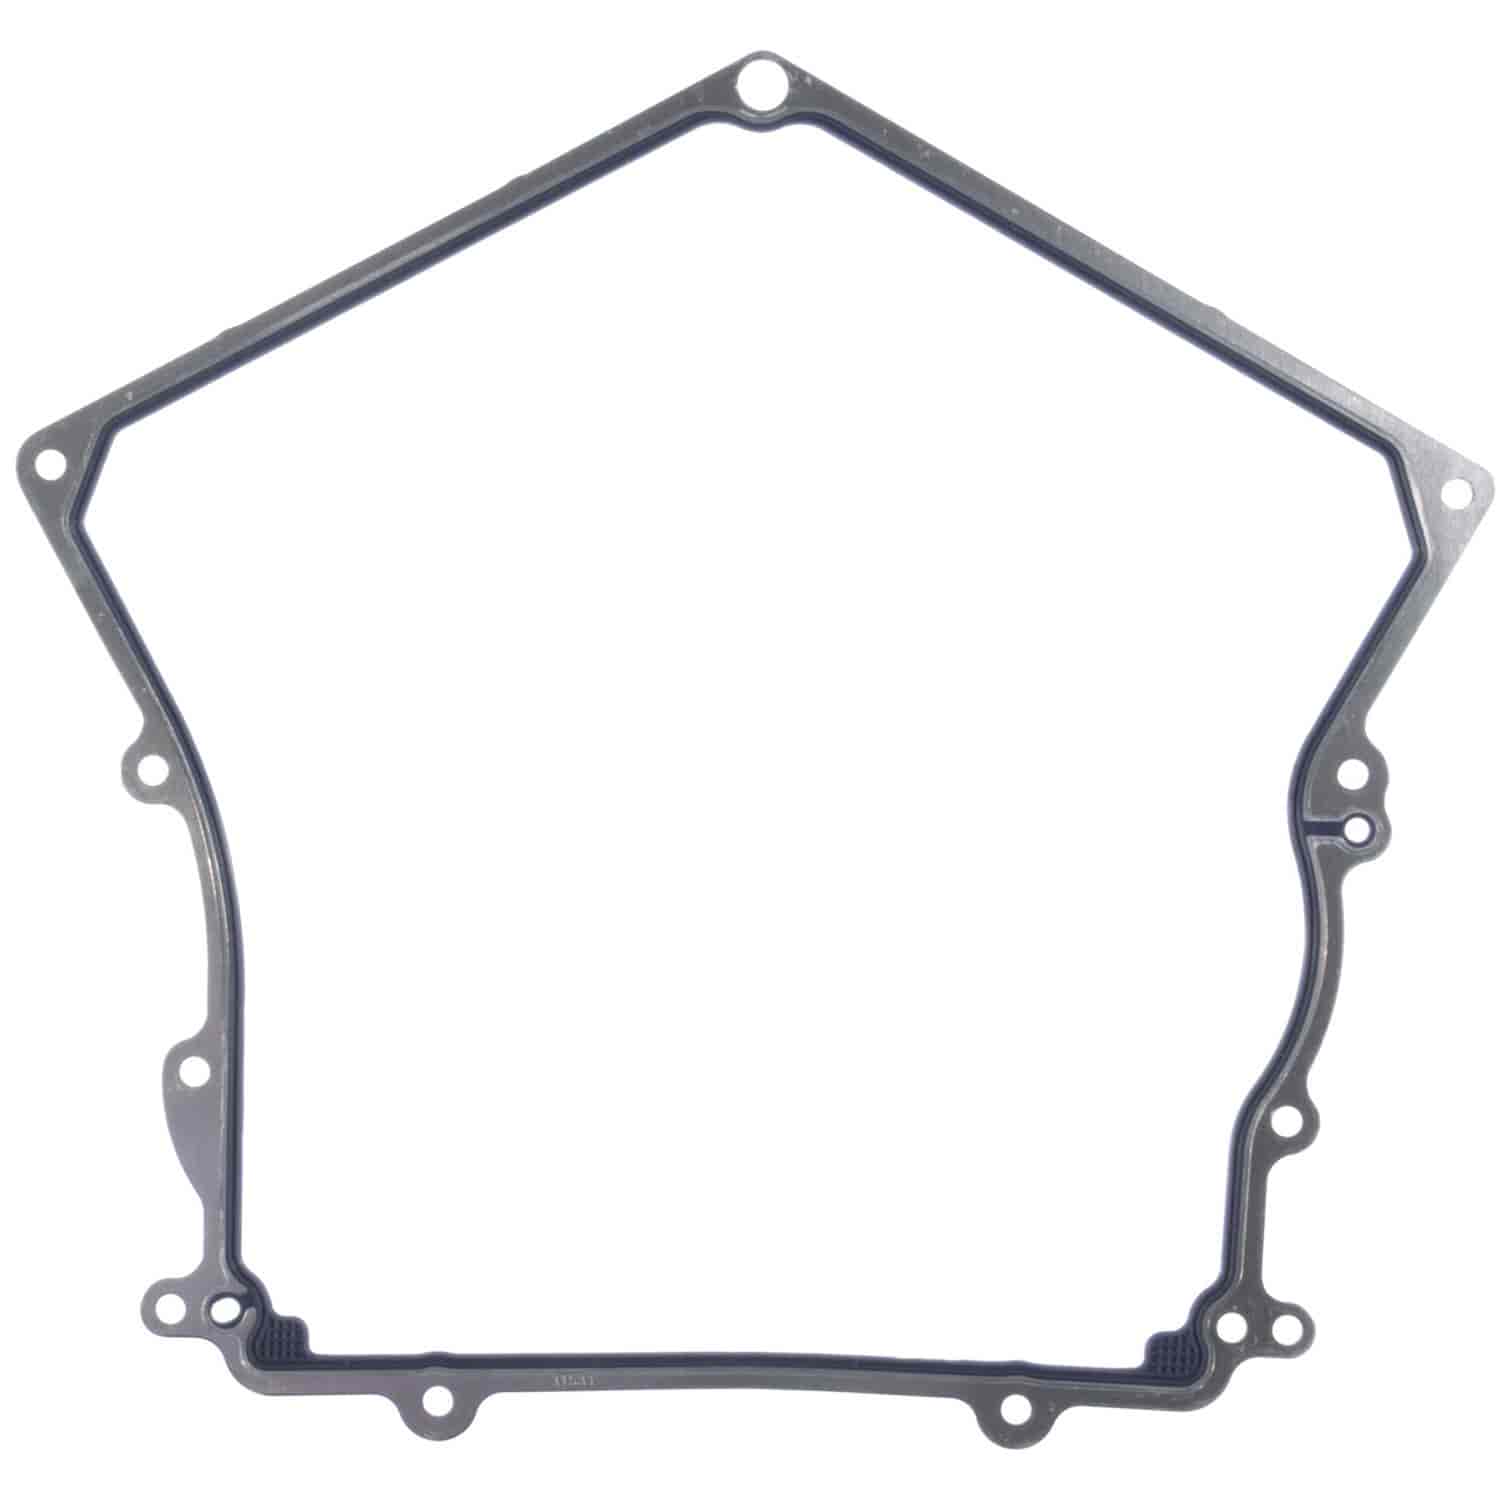 Timing Cover Gasket Chry-Pass 167 2.7L V6 Eng.1998-2008